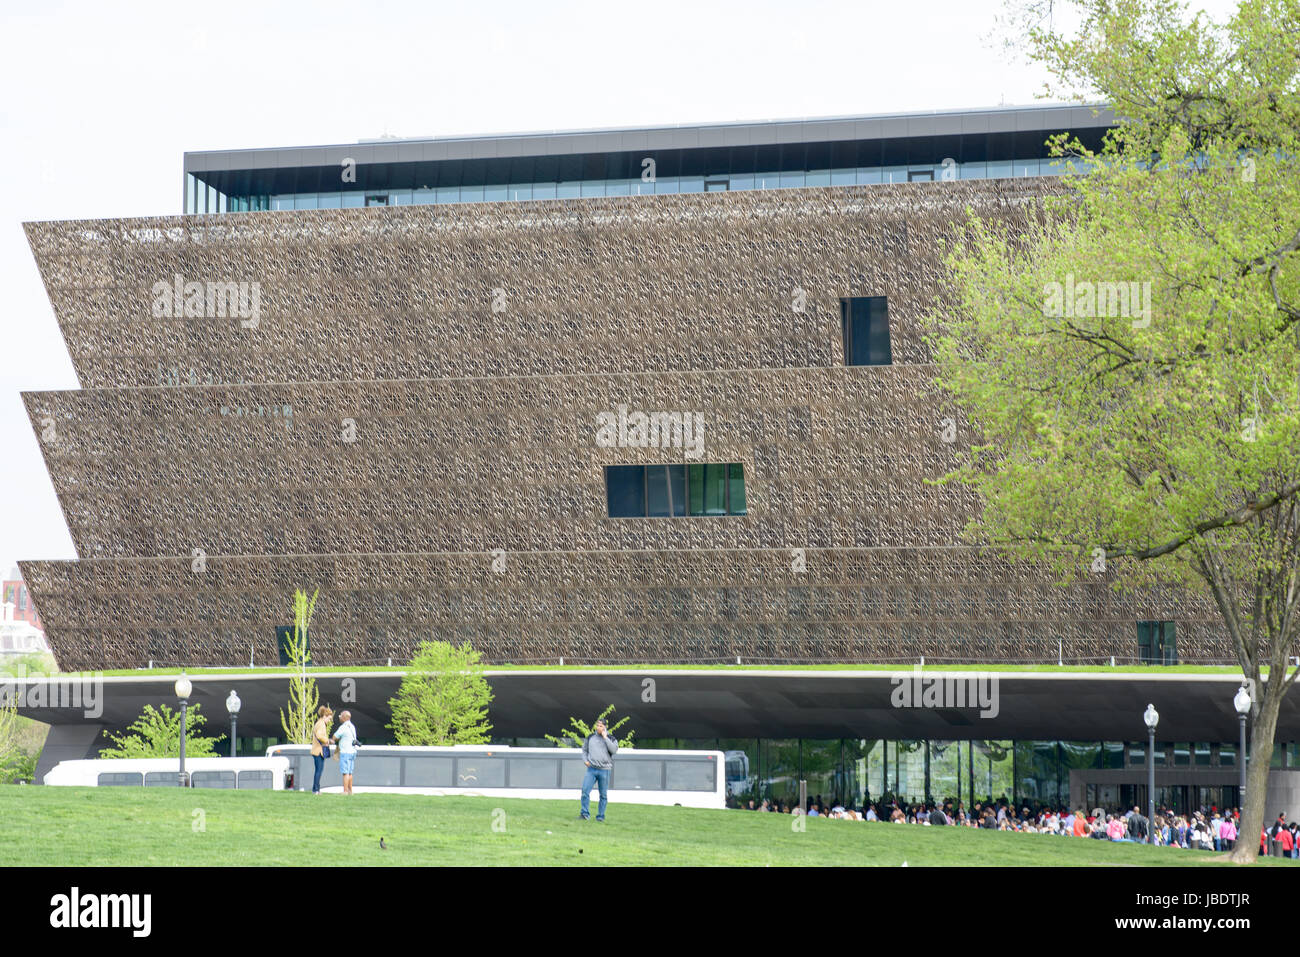 WASHINGTON, DISTRICT OF COLUMBIA - 14. APRIL: Smithsonian National Museum of African American History am 14. April 2017 Stockfoto